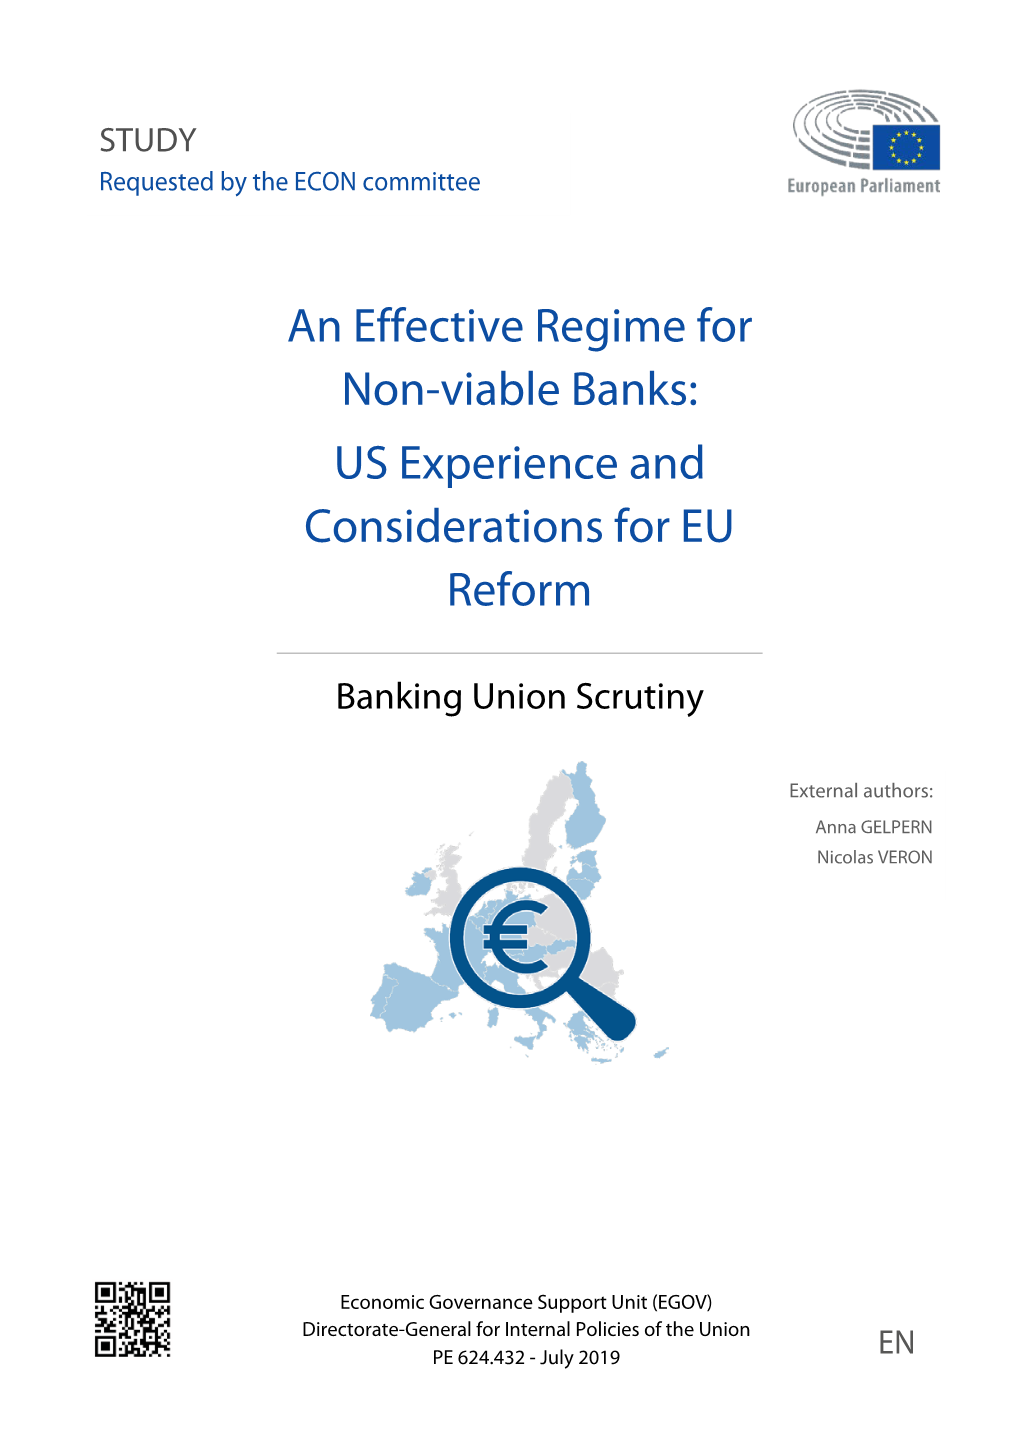 An Effective Regime for Non-Viable Banks: US Experience and Considerations for EU Reform